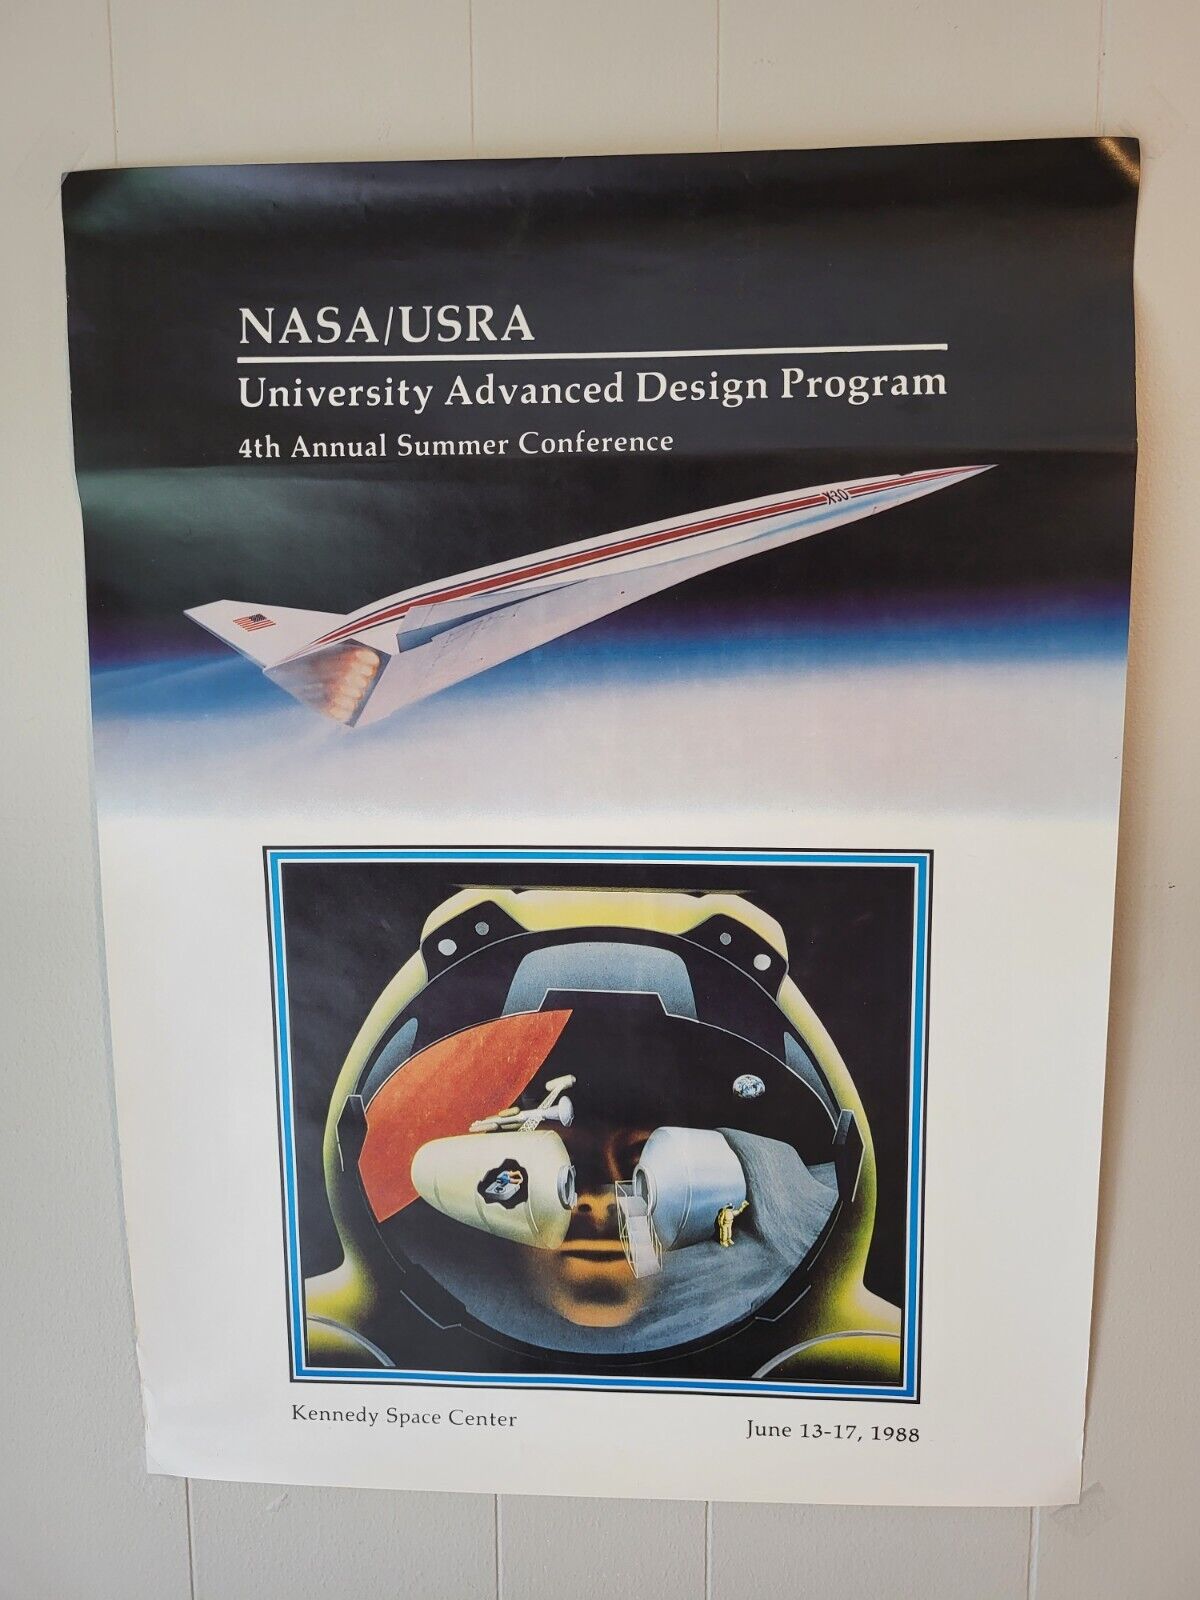 Nasa Ursa Kennedy Space Center June 13-17 1988 4th Annual Summer Conference Post